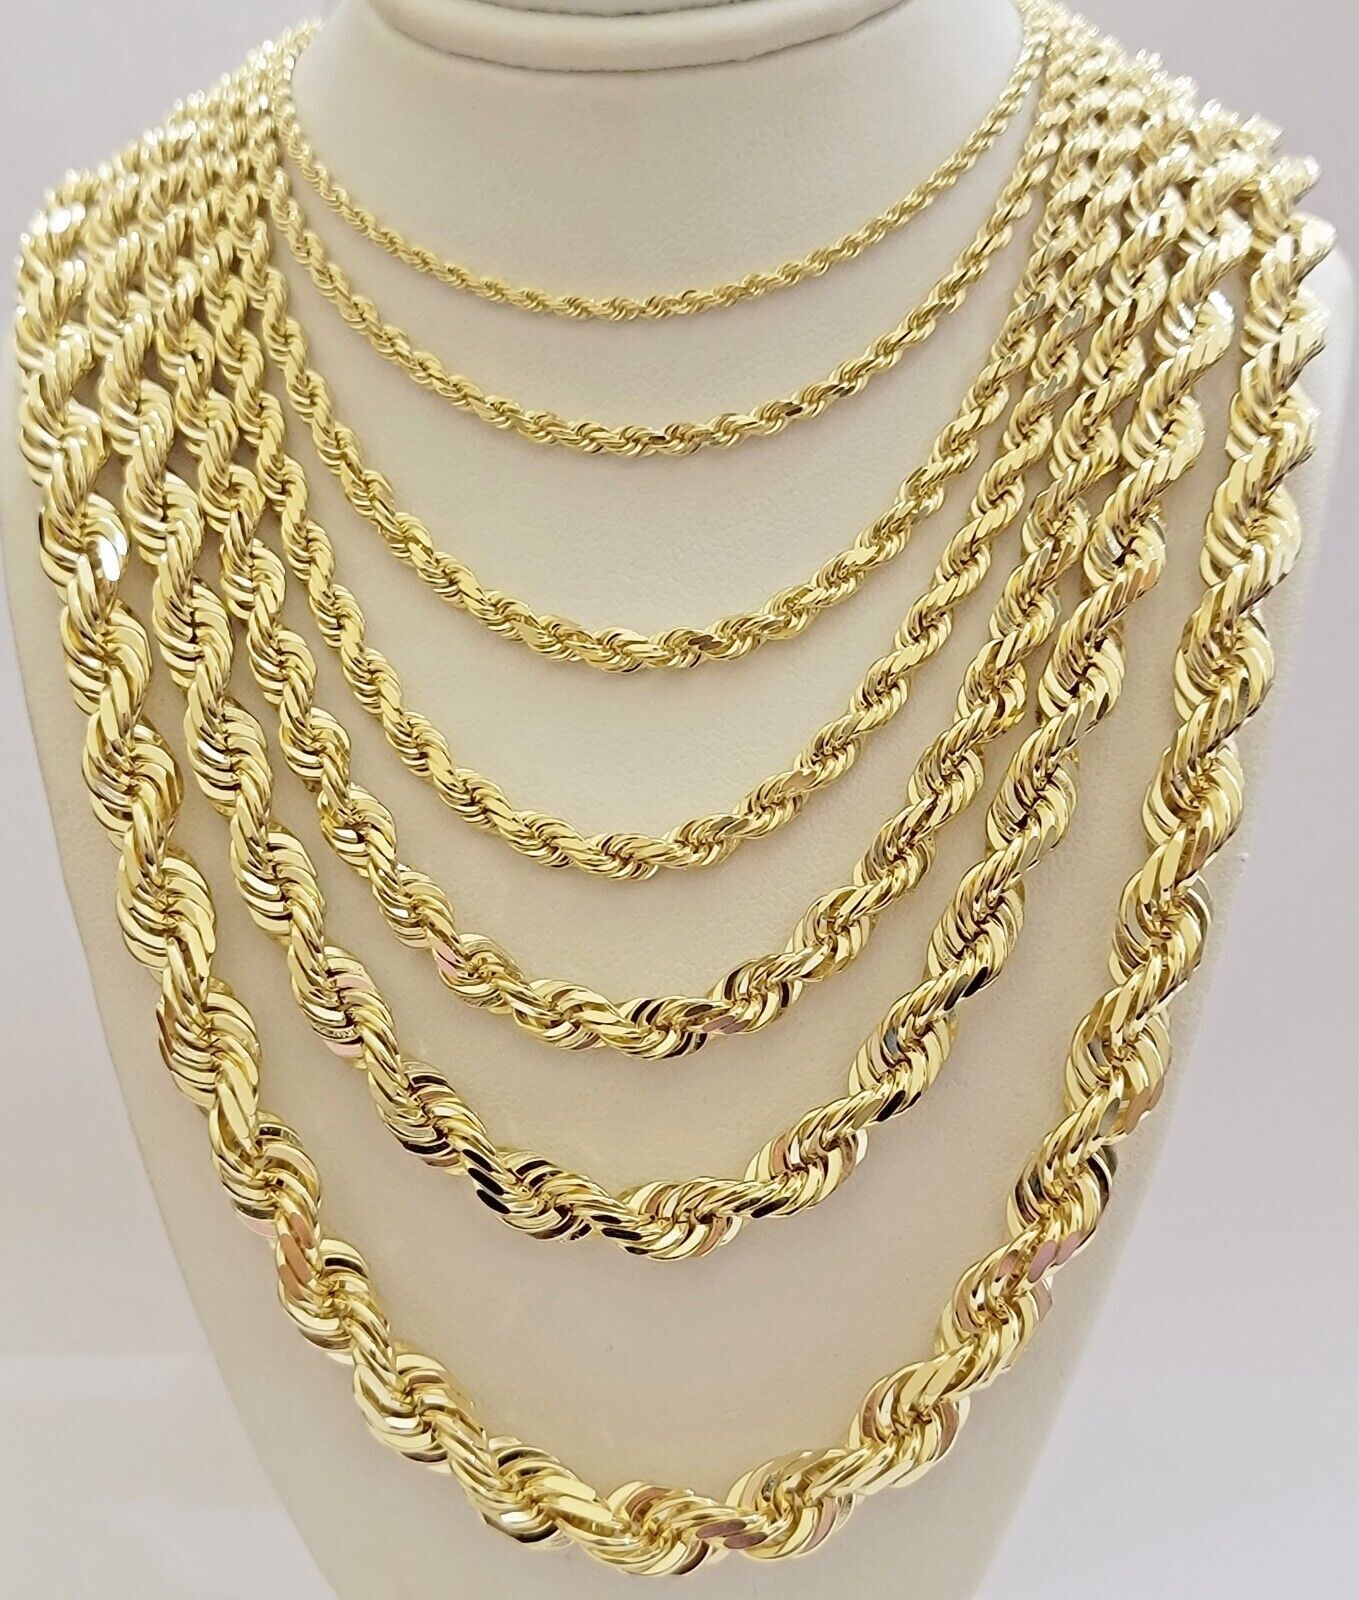 4mm Two-Tone Rope Chain Necklace